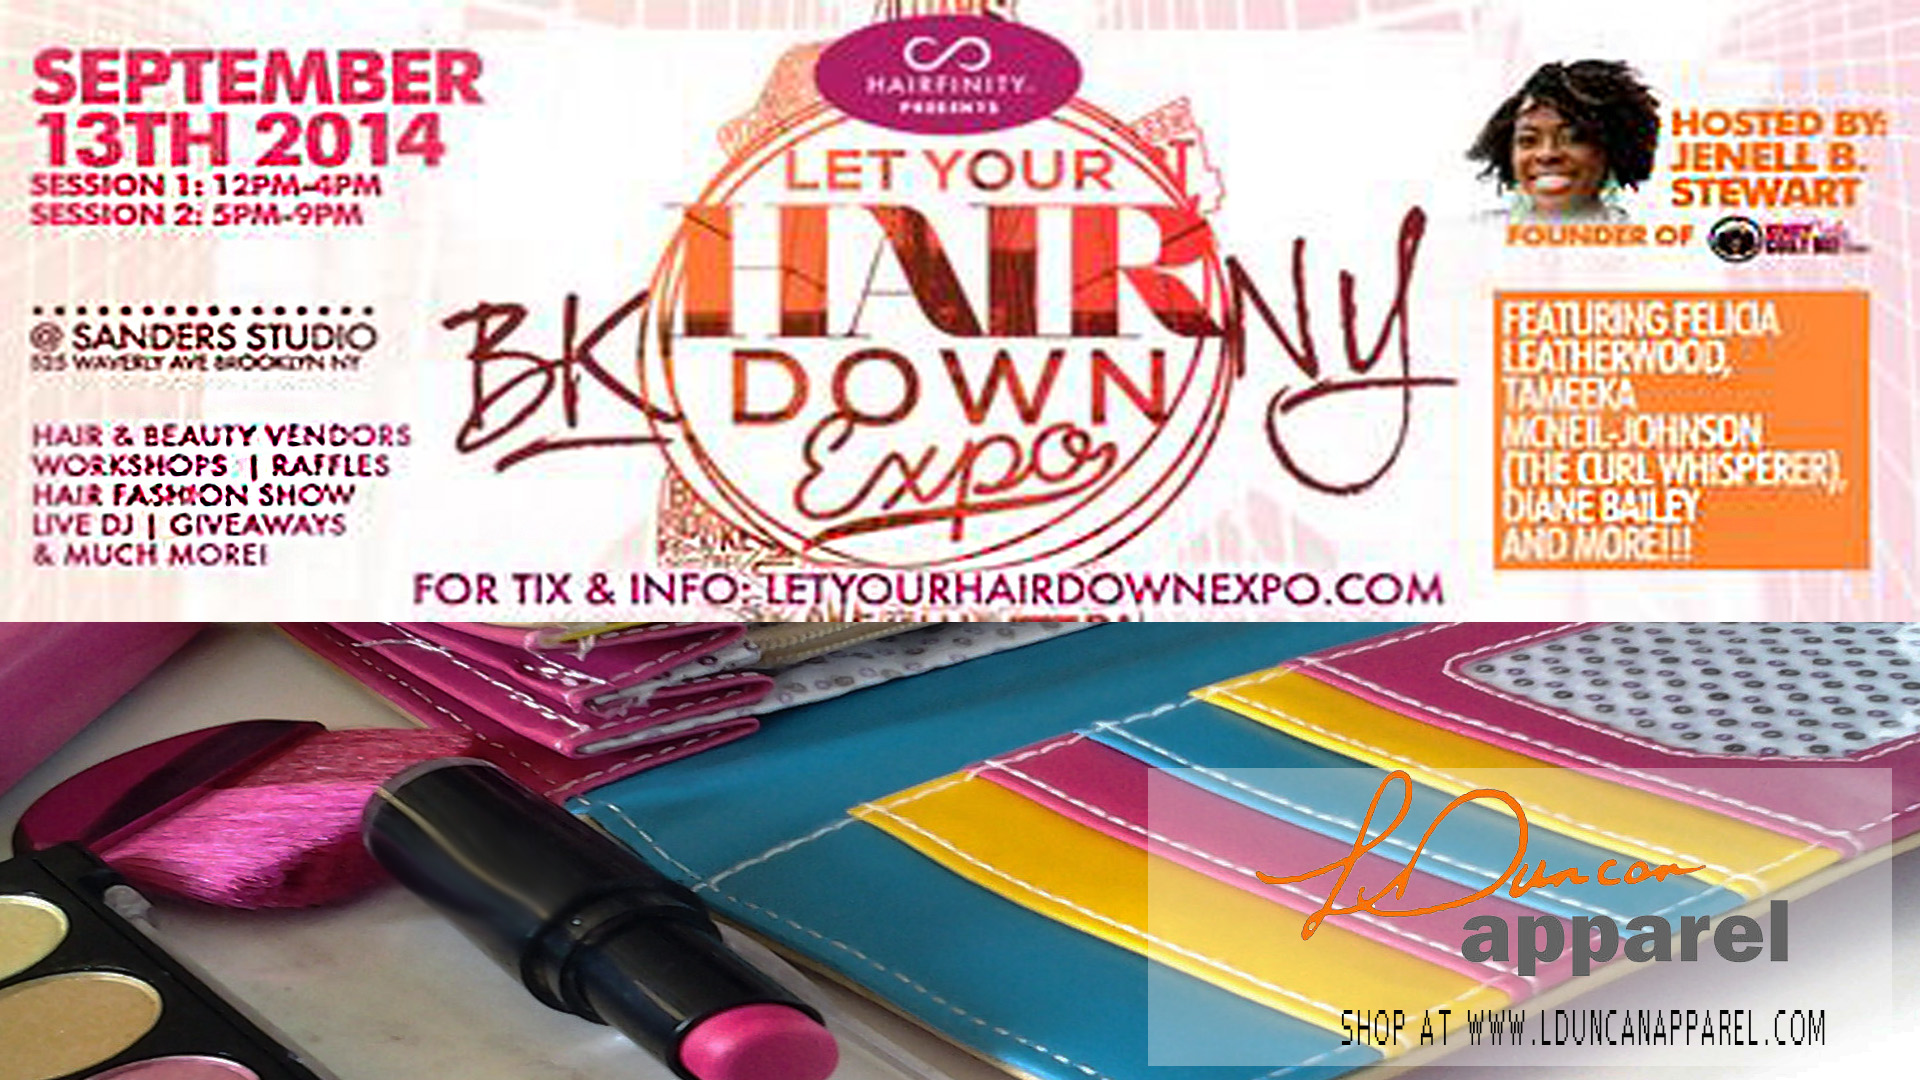 LDuncanApparel at the "Let Your Hair Down EXPO 2014" Sept 13th